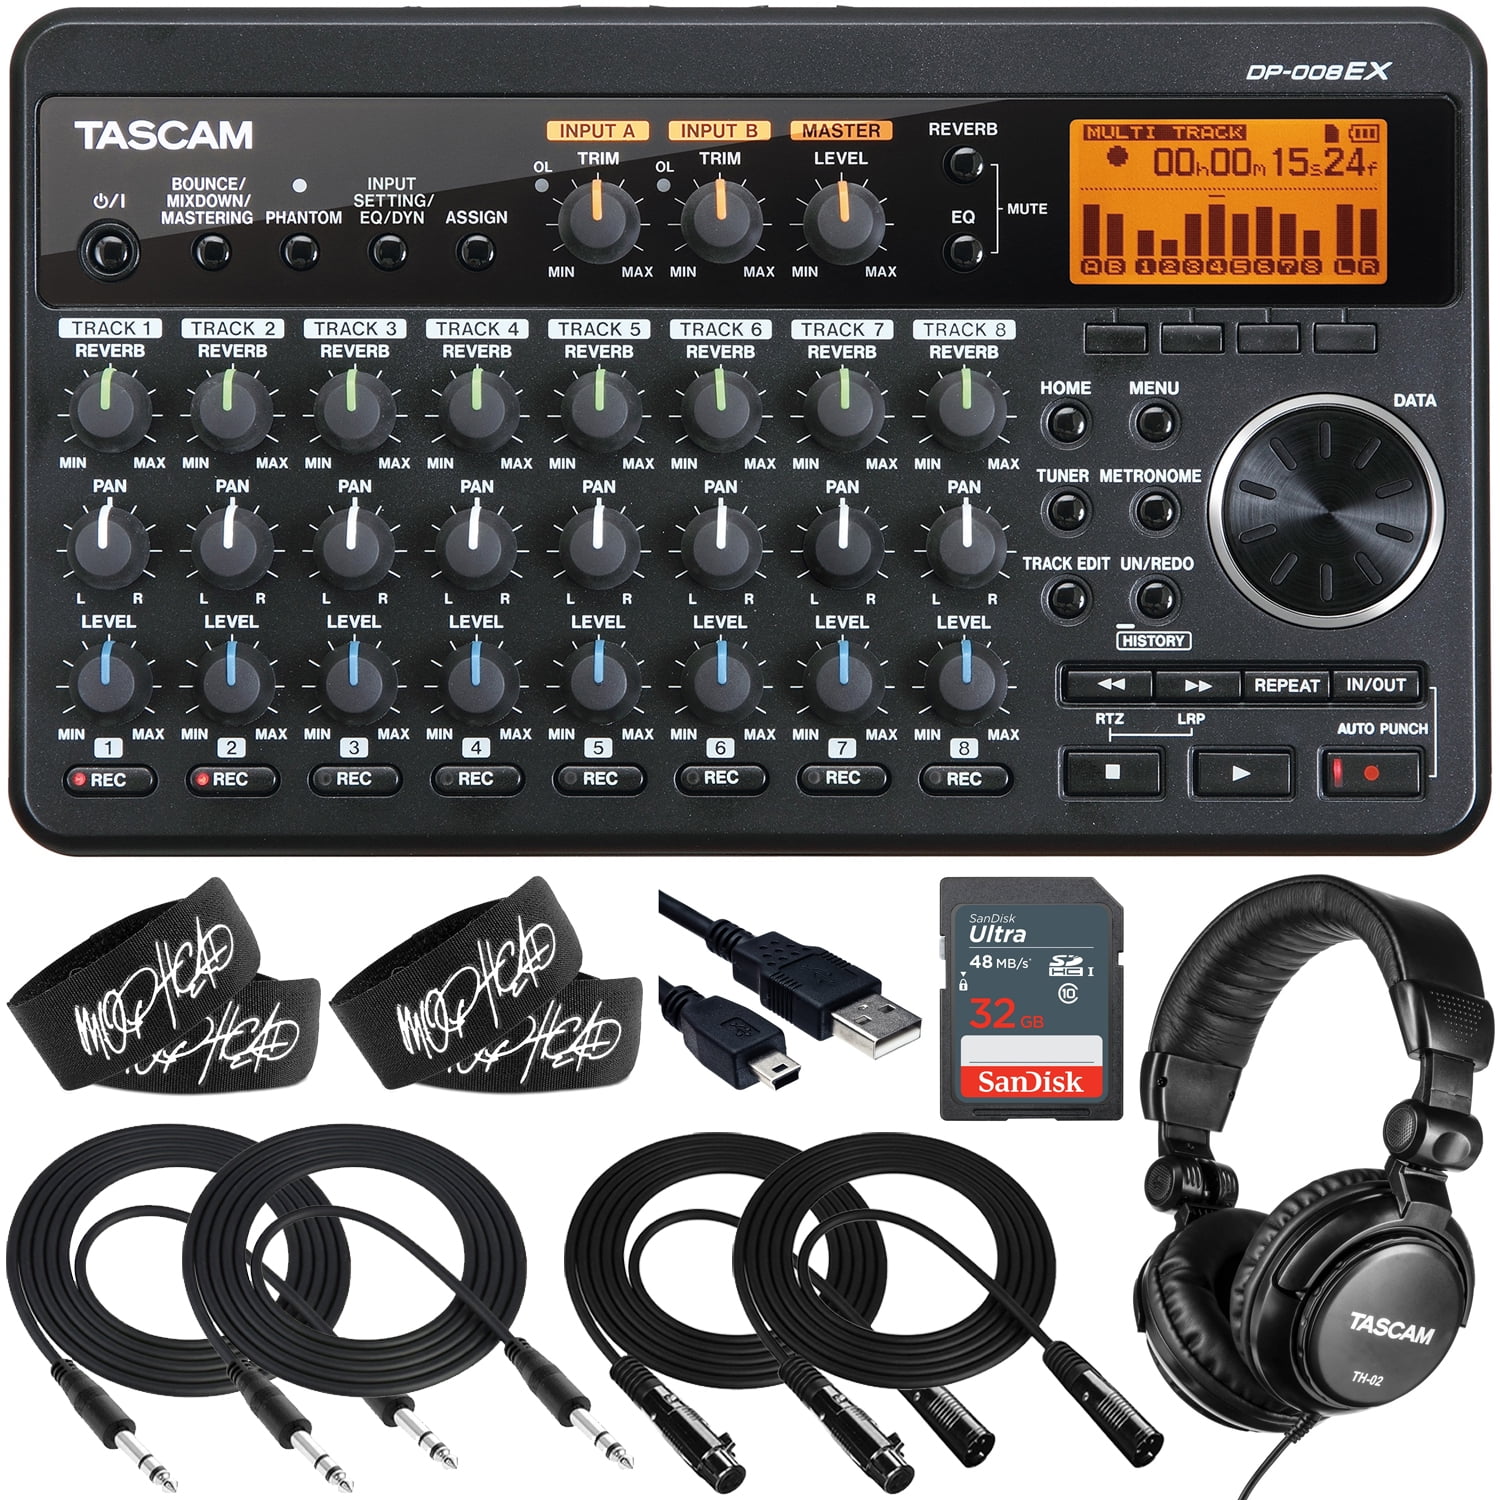 TASCAM DP-008EX Compact 8-Track Digital Pocketstudio Multitrack Recorder  Bundle with 32GB Ultra Memory Card, TH-02 Headphones, 2x 10-Foot TRS Cable,  2x 10-Foot XLR Cable and 4x Cable Ties - Walmart.com